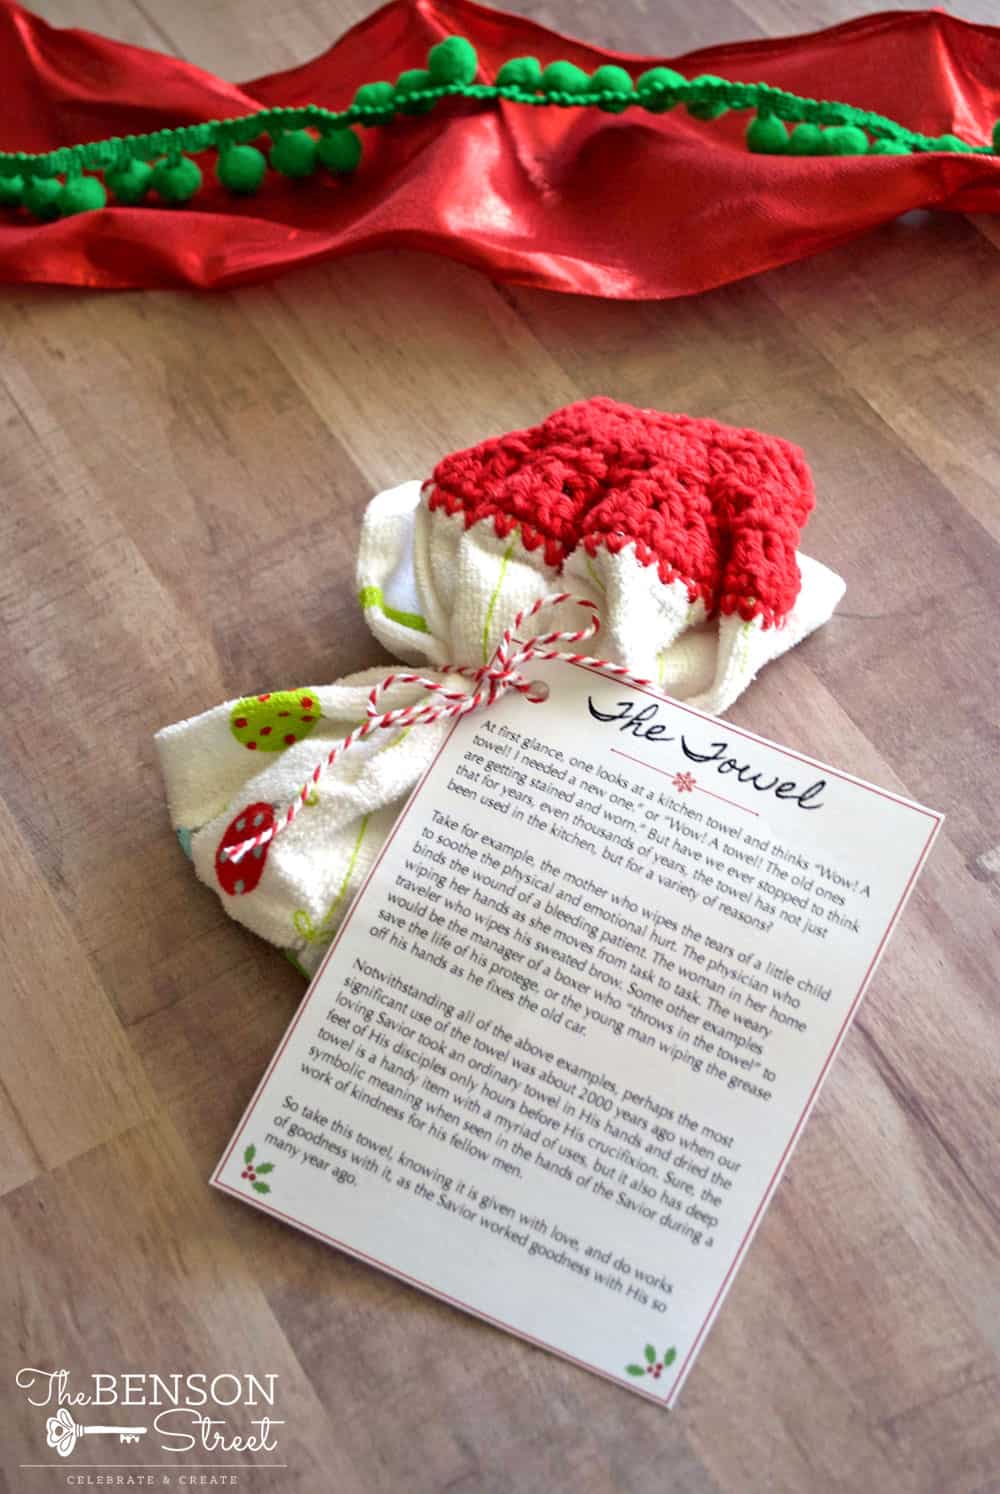 https://www.thebensonstreet.com/2019/11/19/christmas-towel-story/a-towel-might-not-seem-like-the-greatest-gift-until-you-read-this-cute-printable-at-thebensonstreet-com/